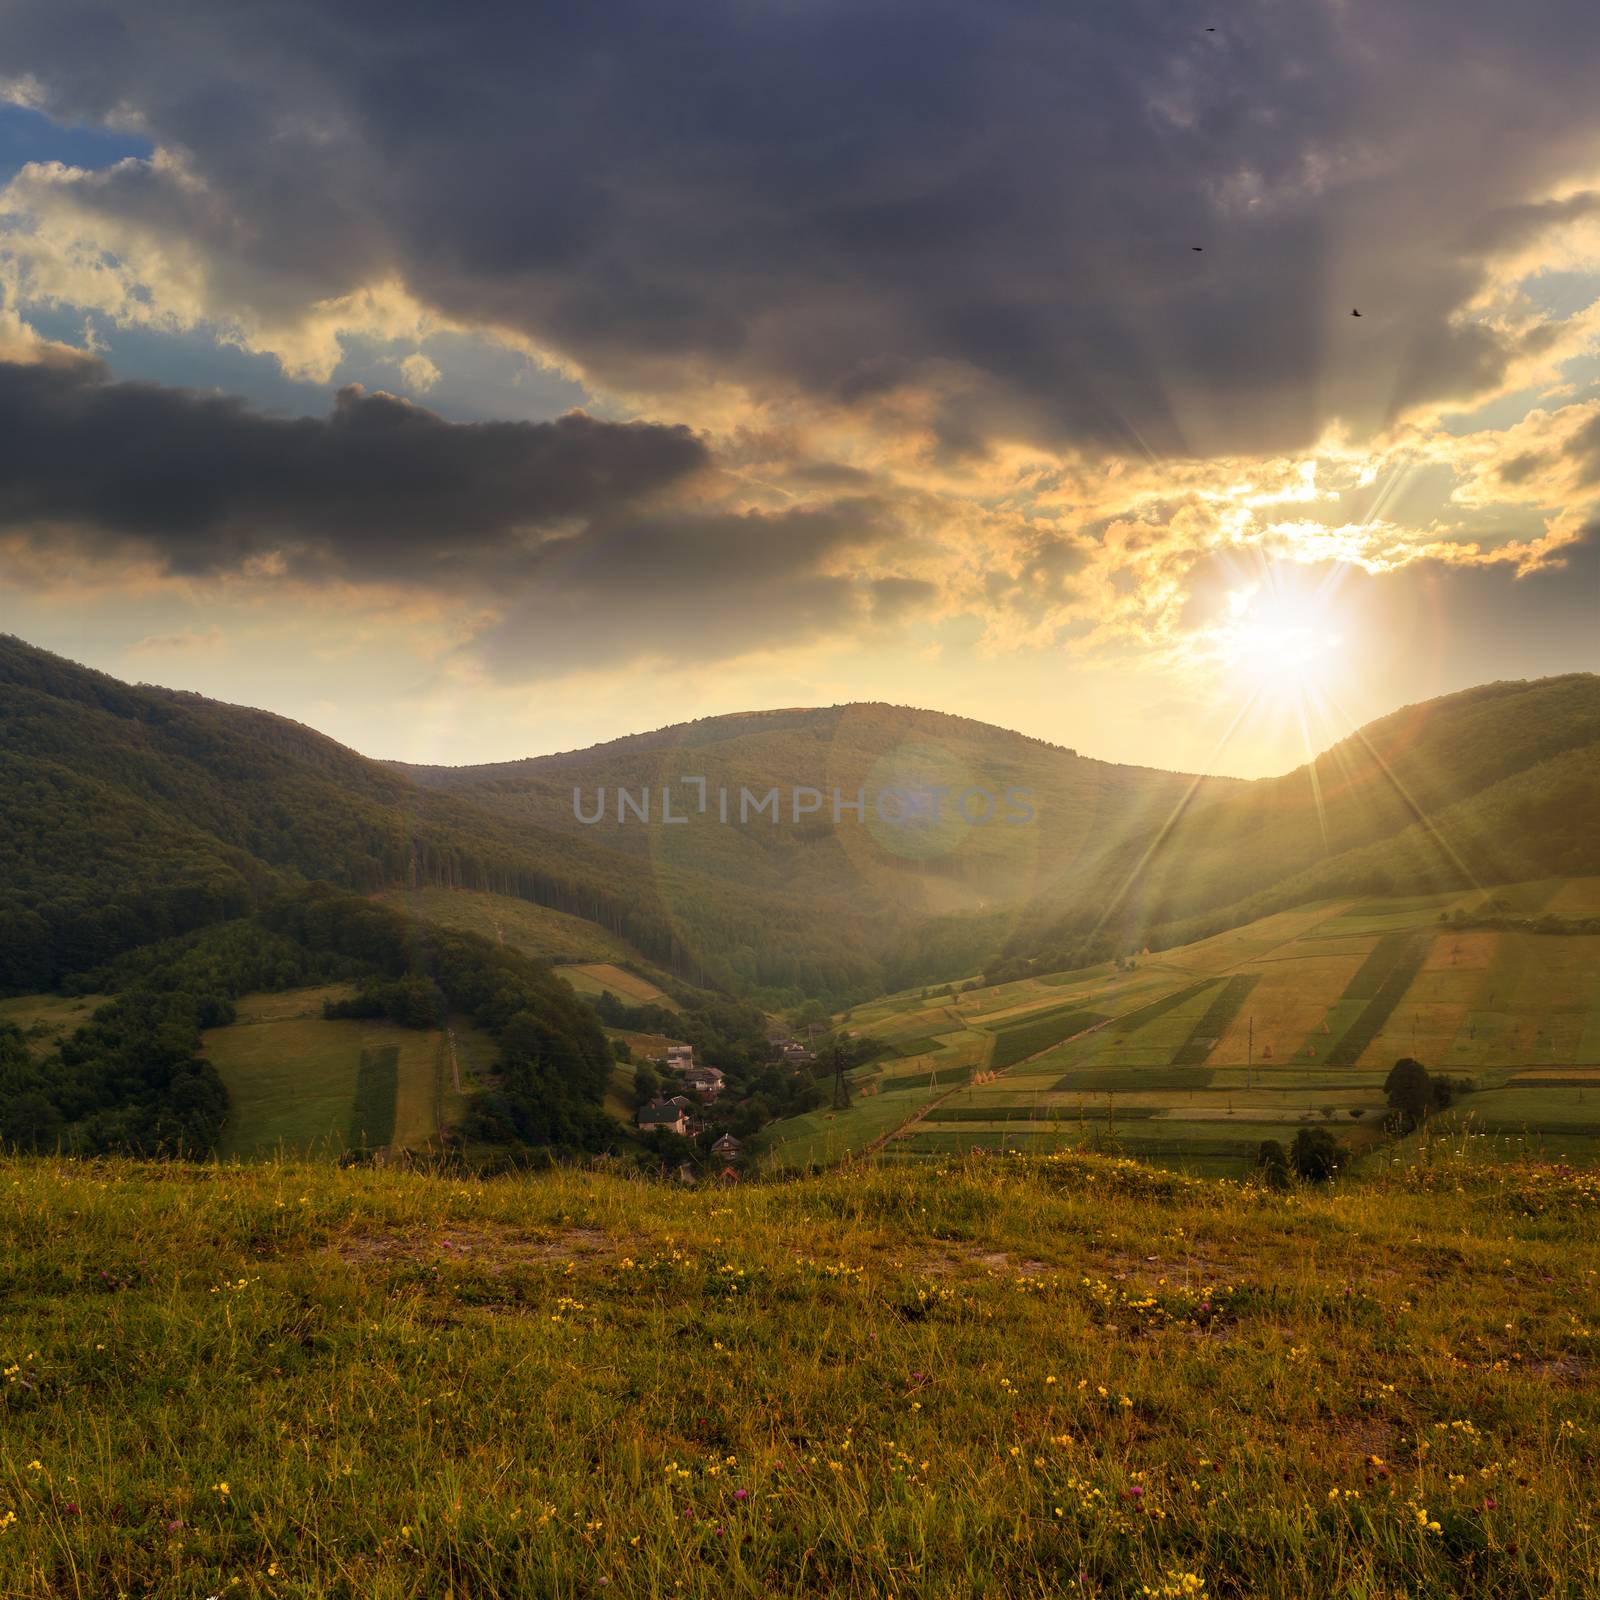 field near home in mountains at sunset by Pellinni